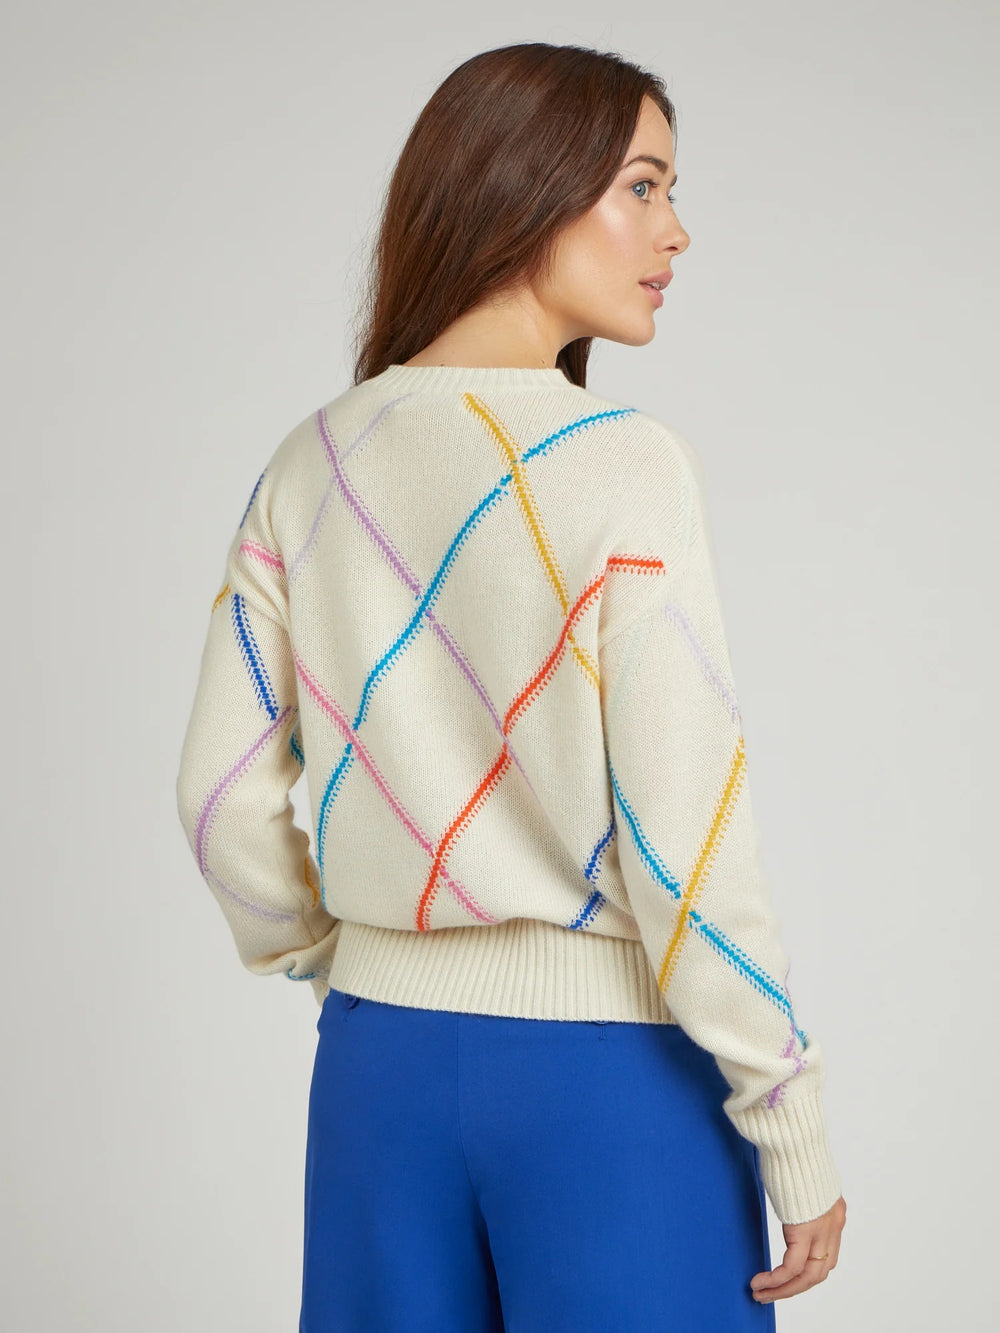 Cocoa Cashmere - The Plaid Crew Natural White Multi is woven from luxurious cashmere, this plaid crew is a timeless essential with a modern twist.